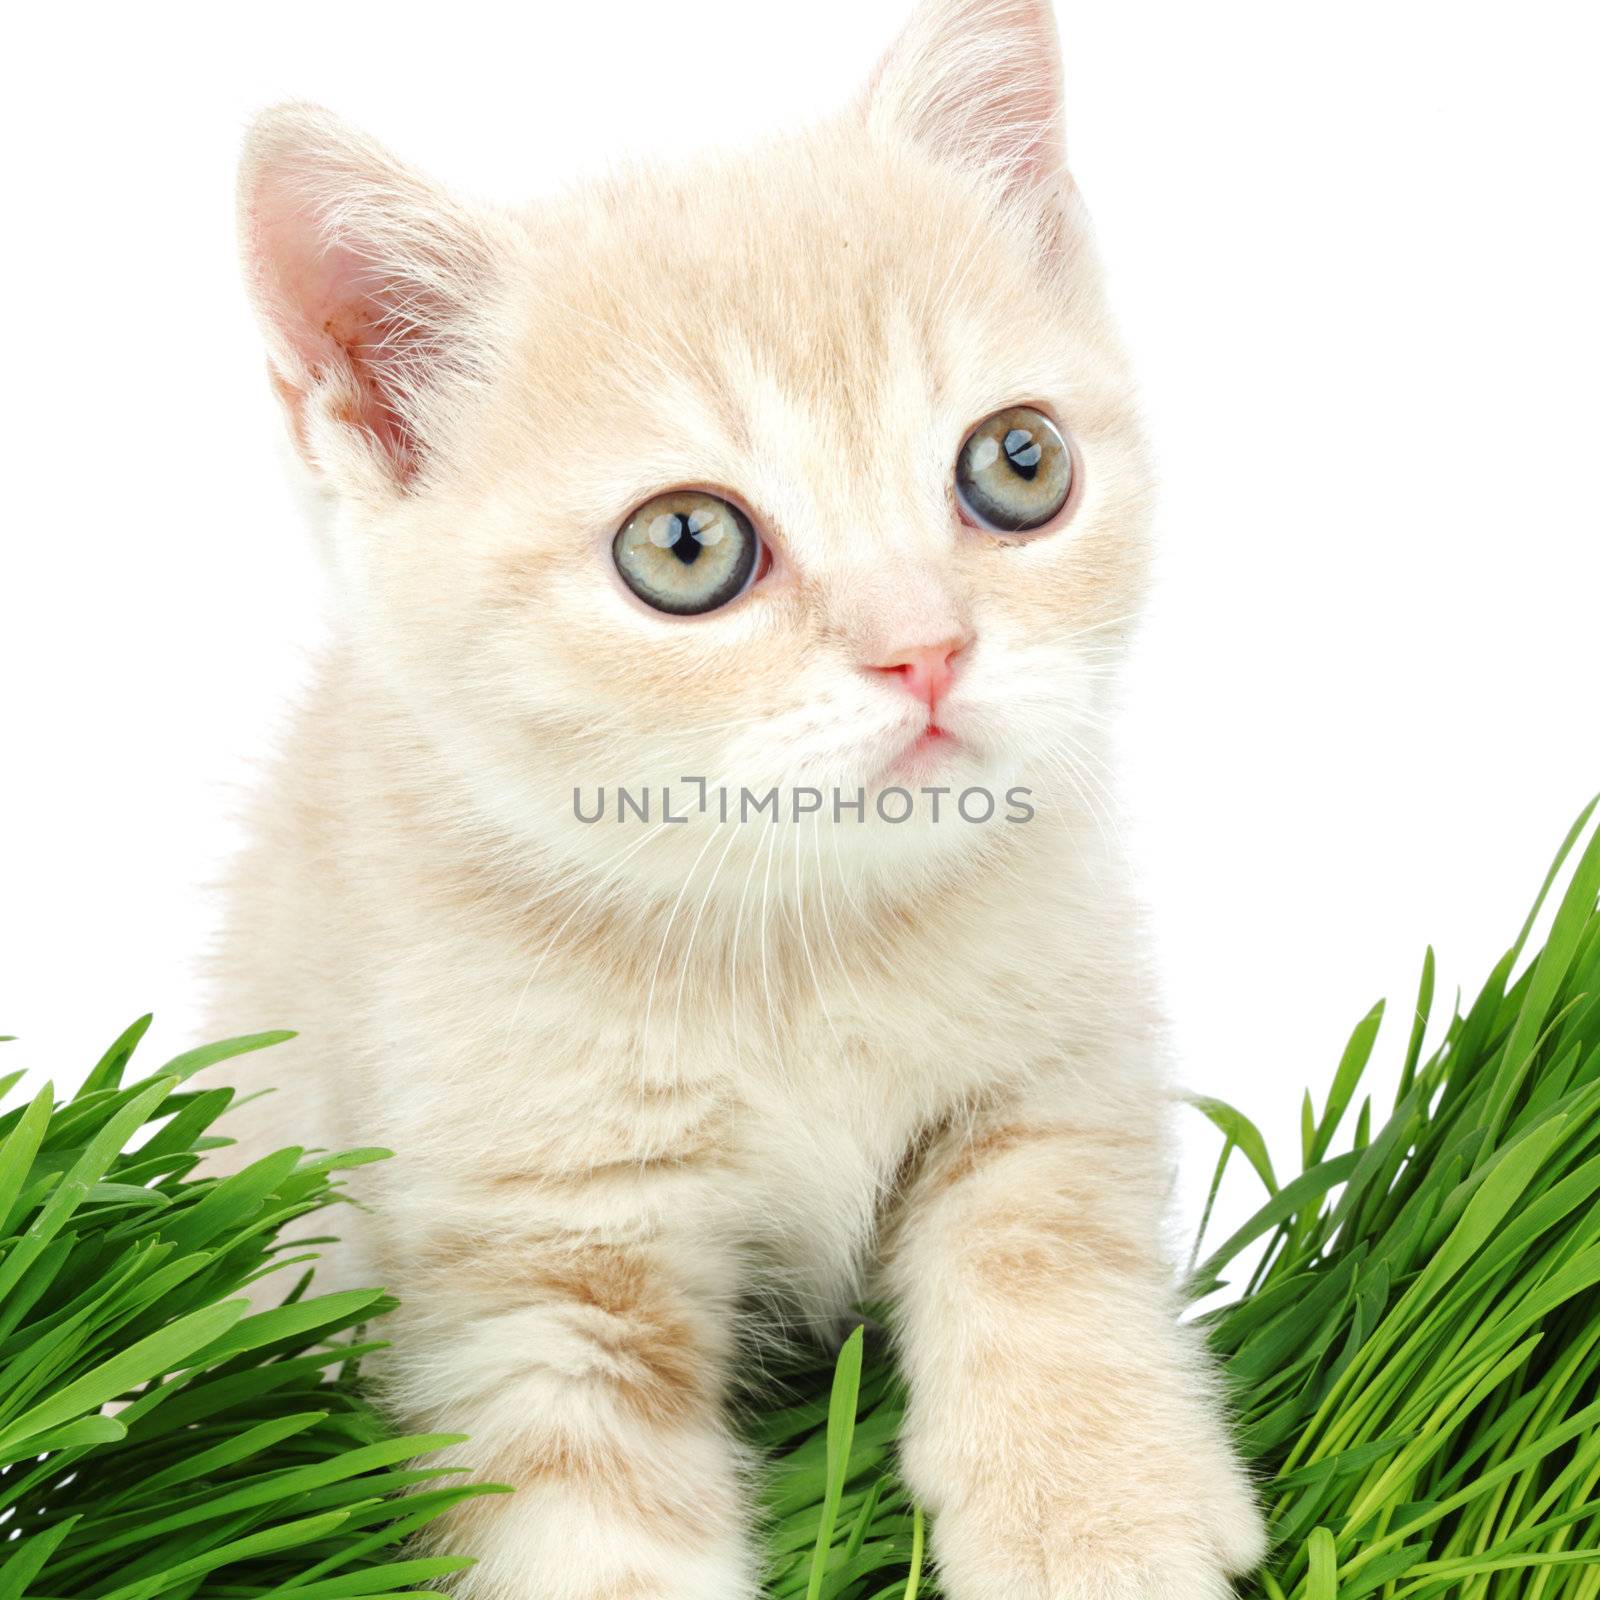 cat behind grass isolated on white background